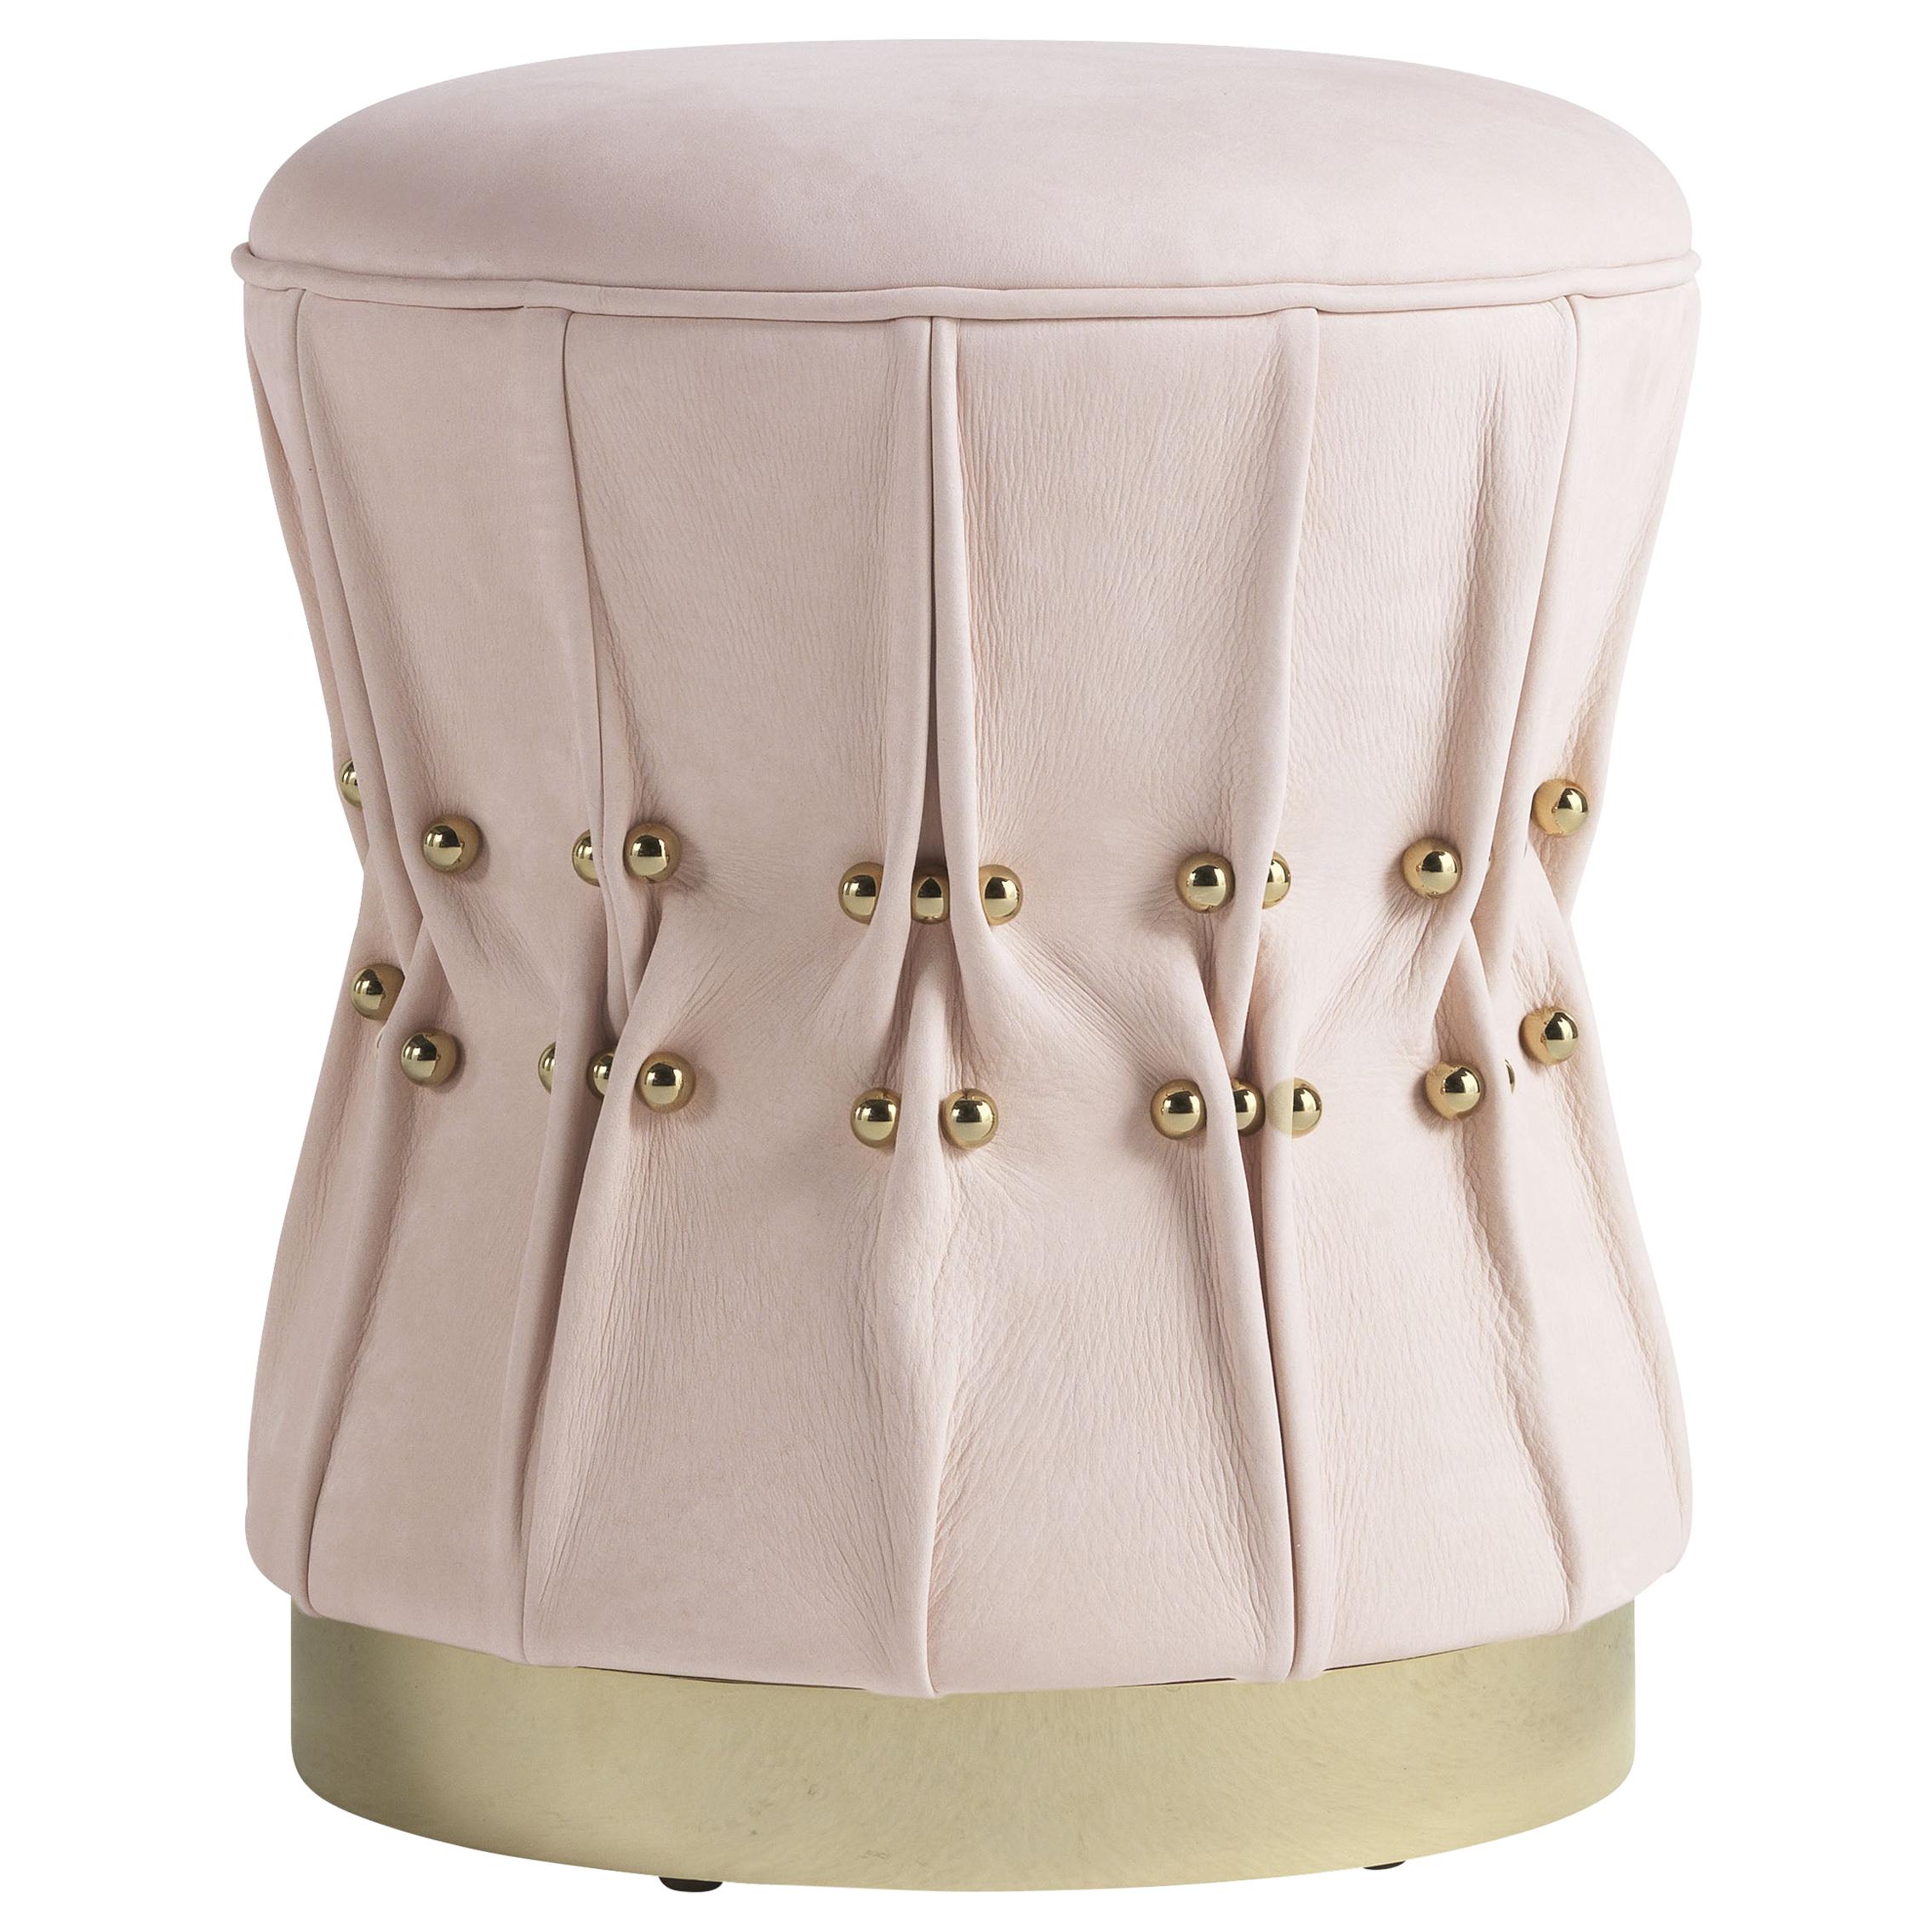 21st Century Inanda Pouf in Light Pink Leather by Roberto Cavalli Home Interiors For Sale